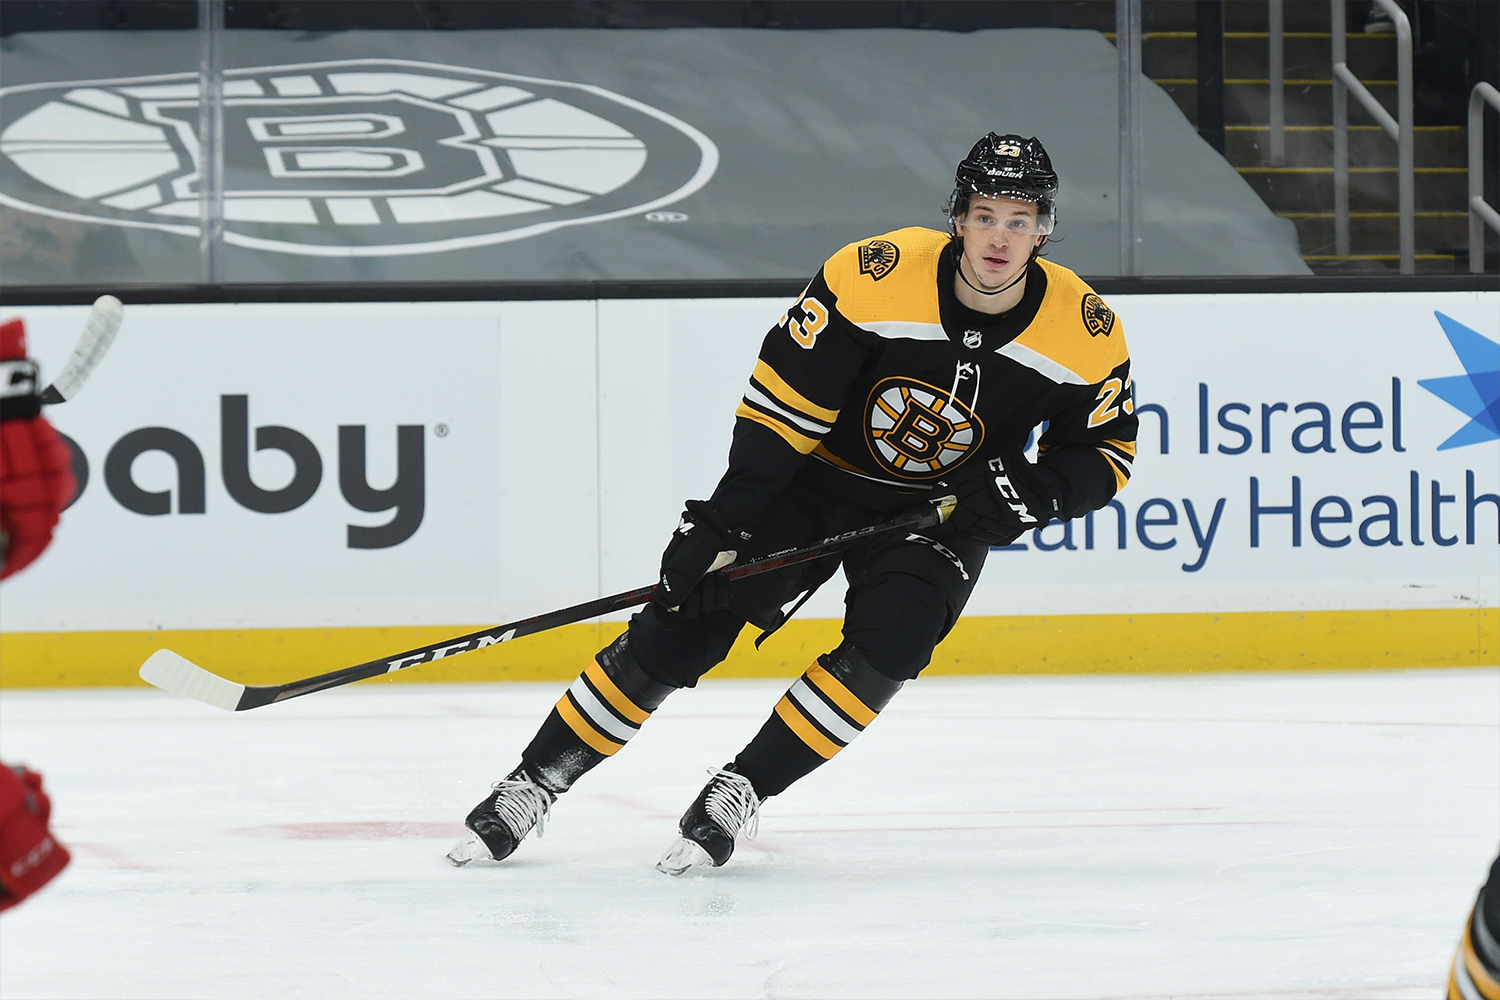 Jakob Forsbacka Karlsson #23 of the Boston Bruins skates against the New Jersey Devils at the TD Garden on March 28, 2021